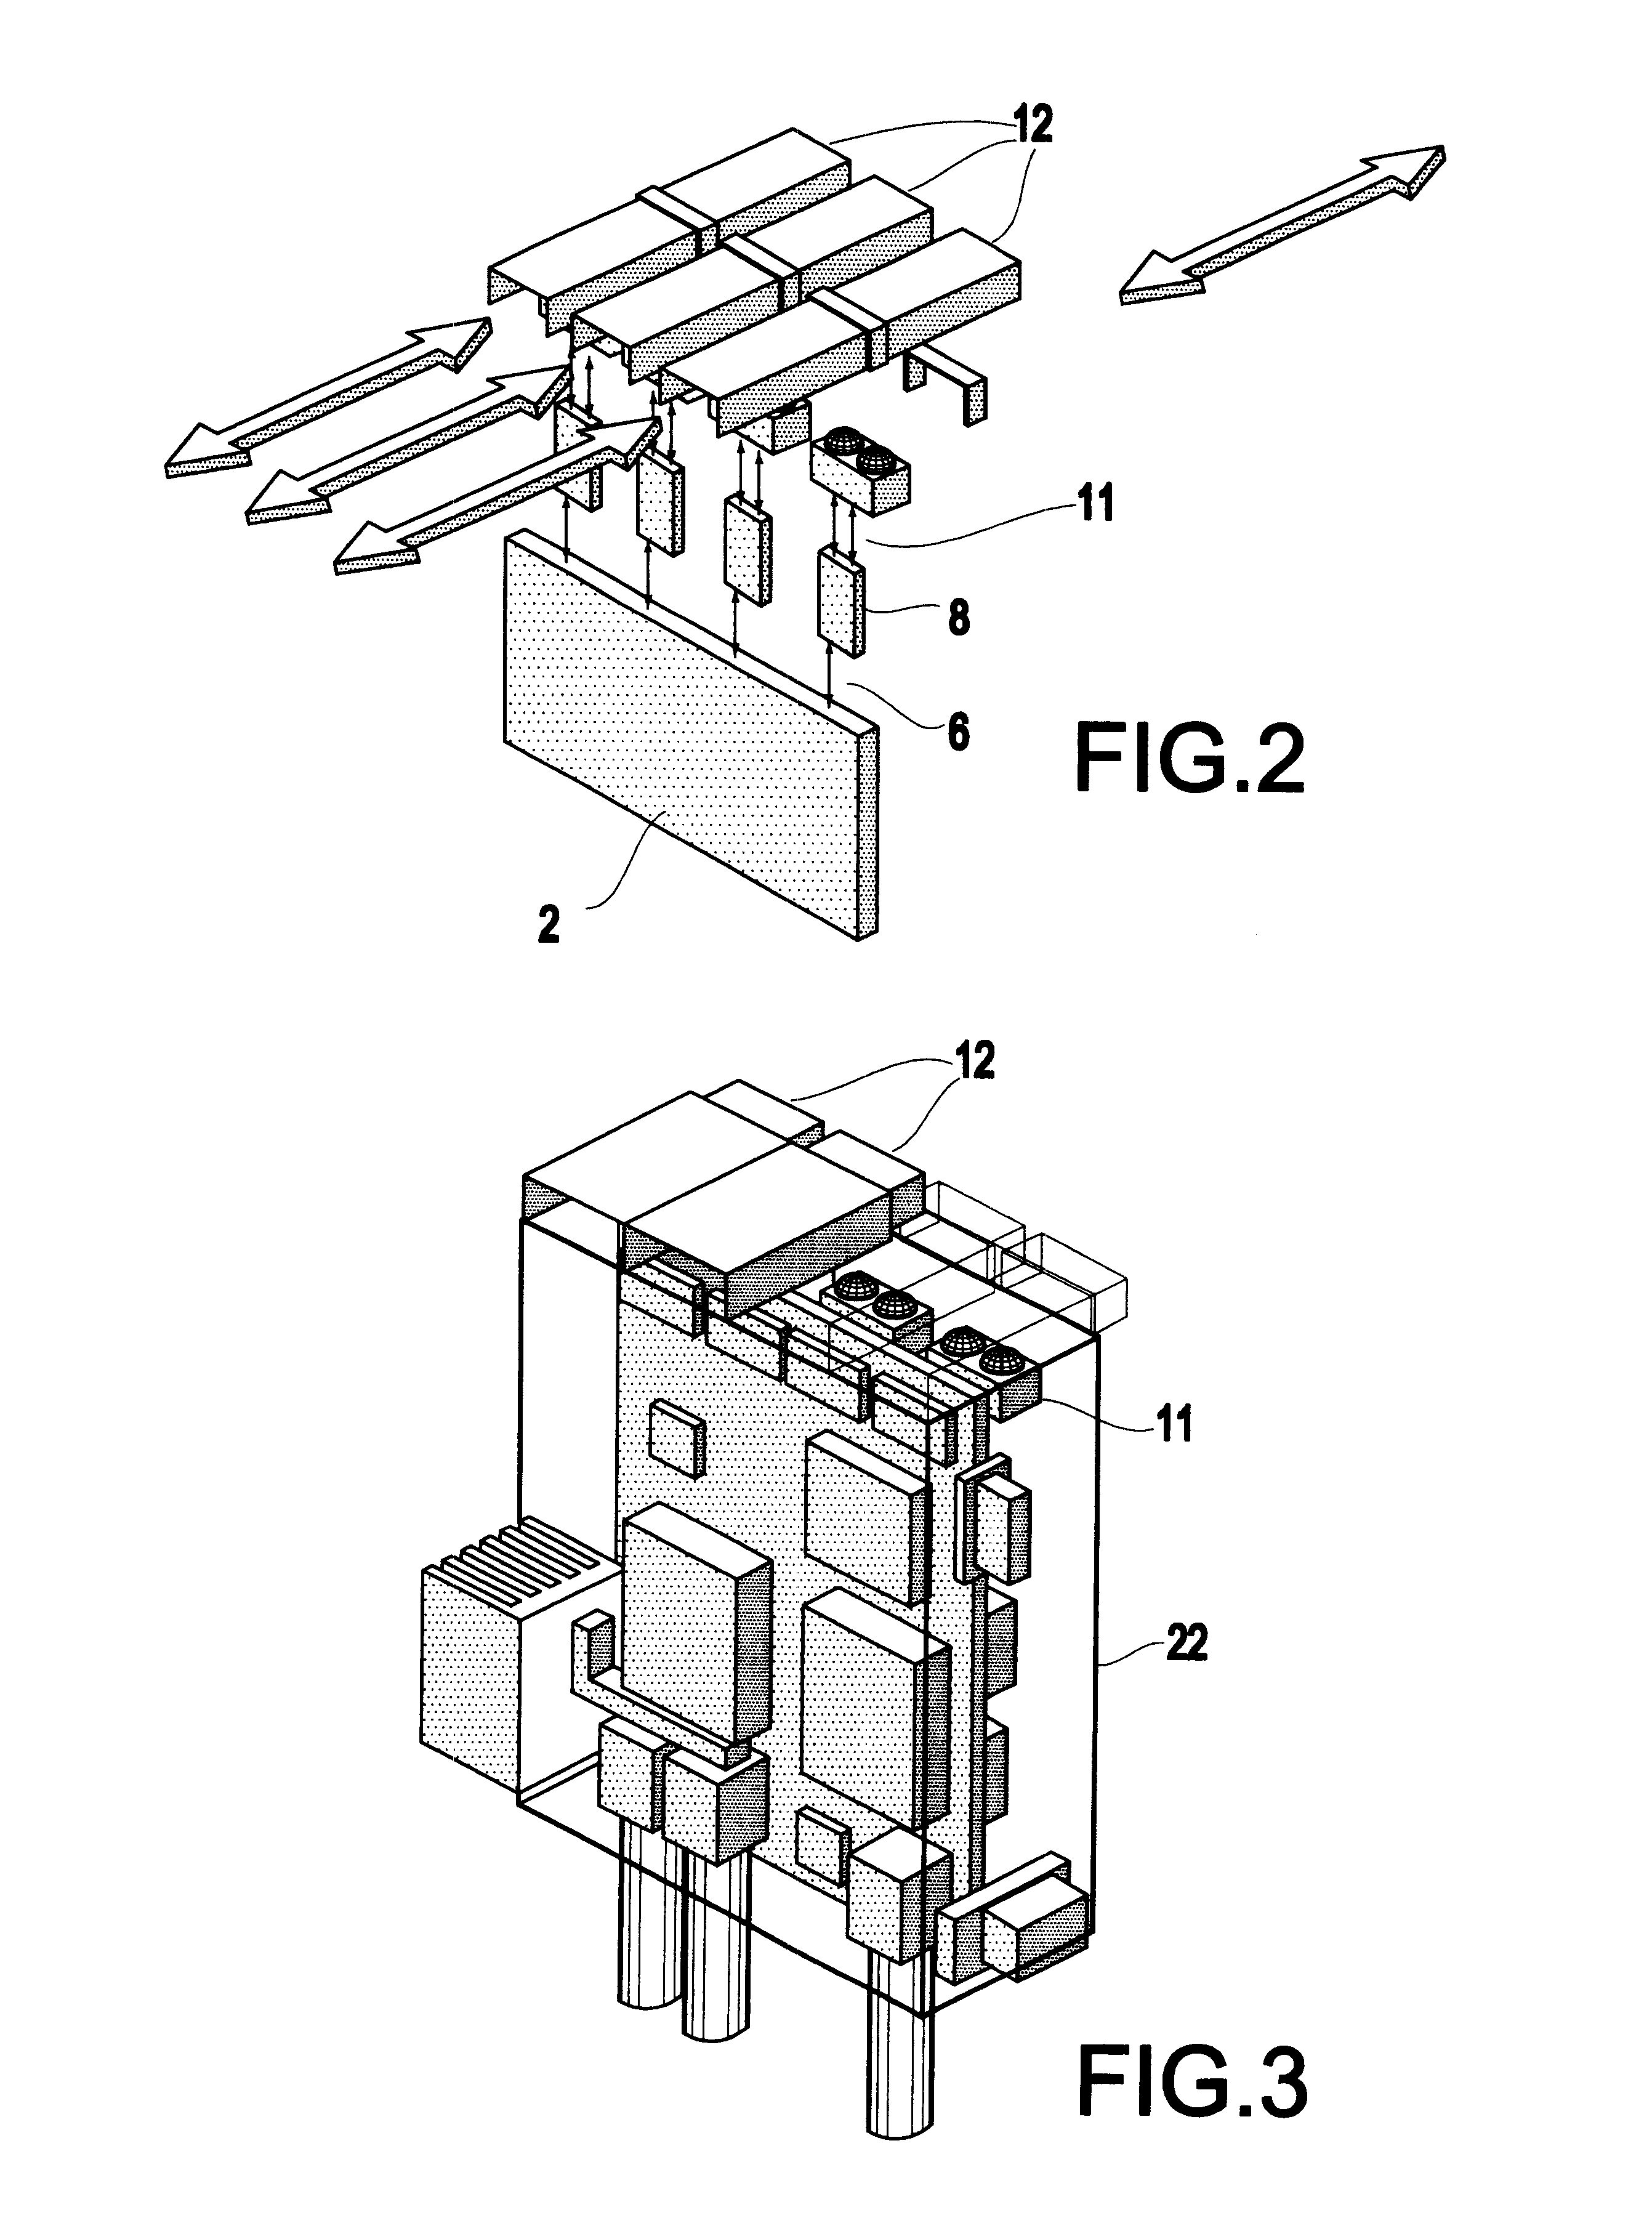 Optical bus system and method